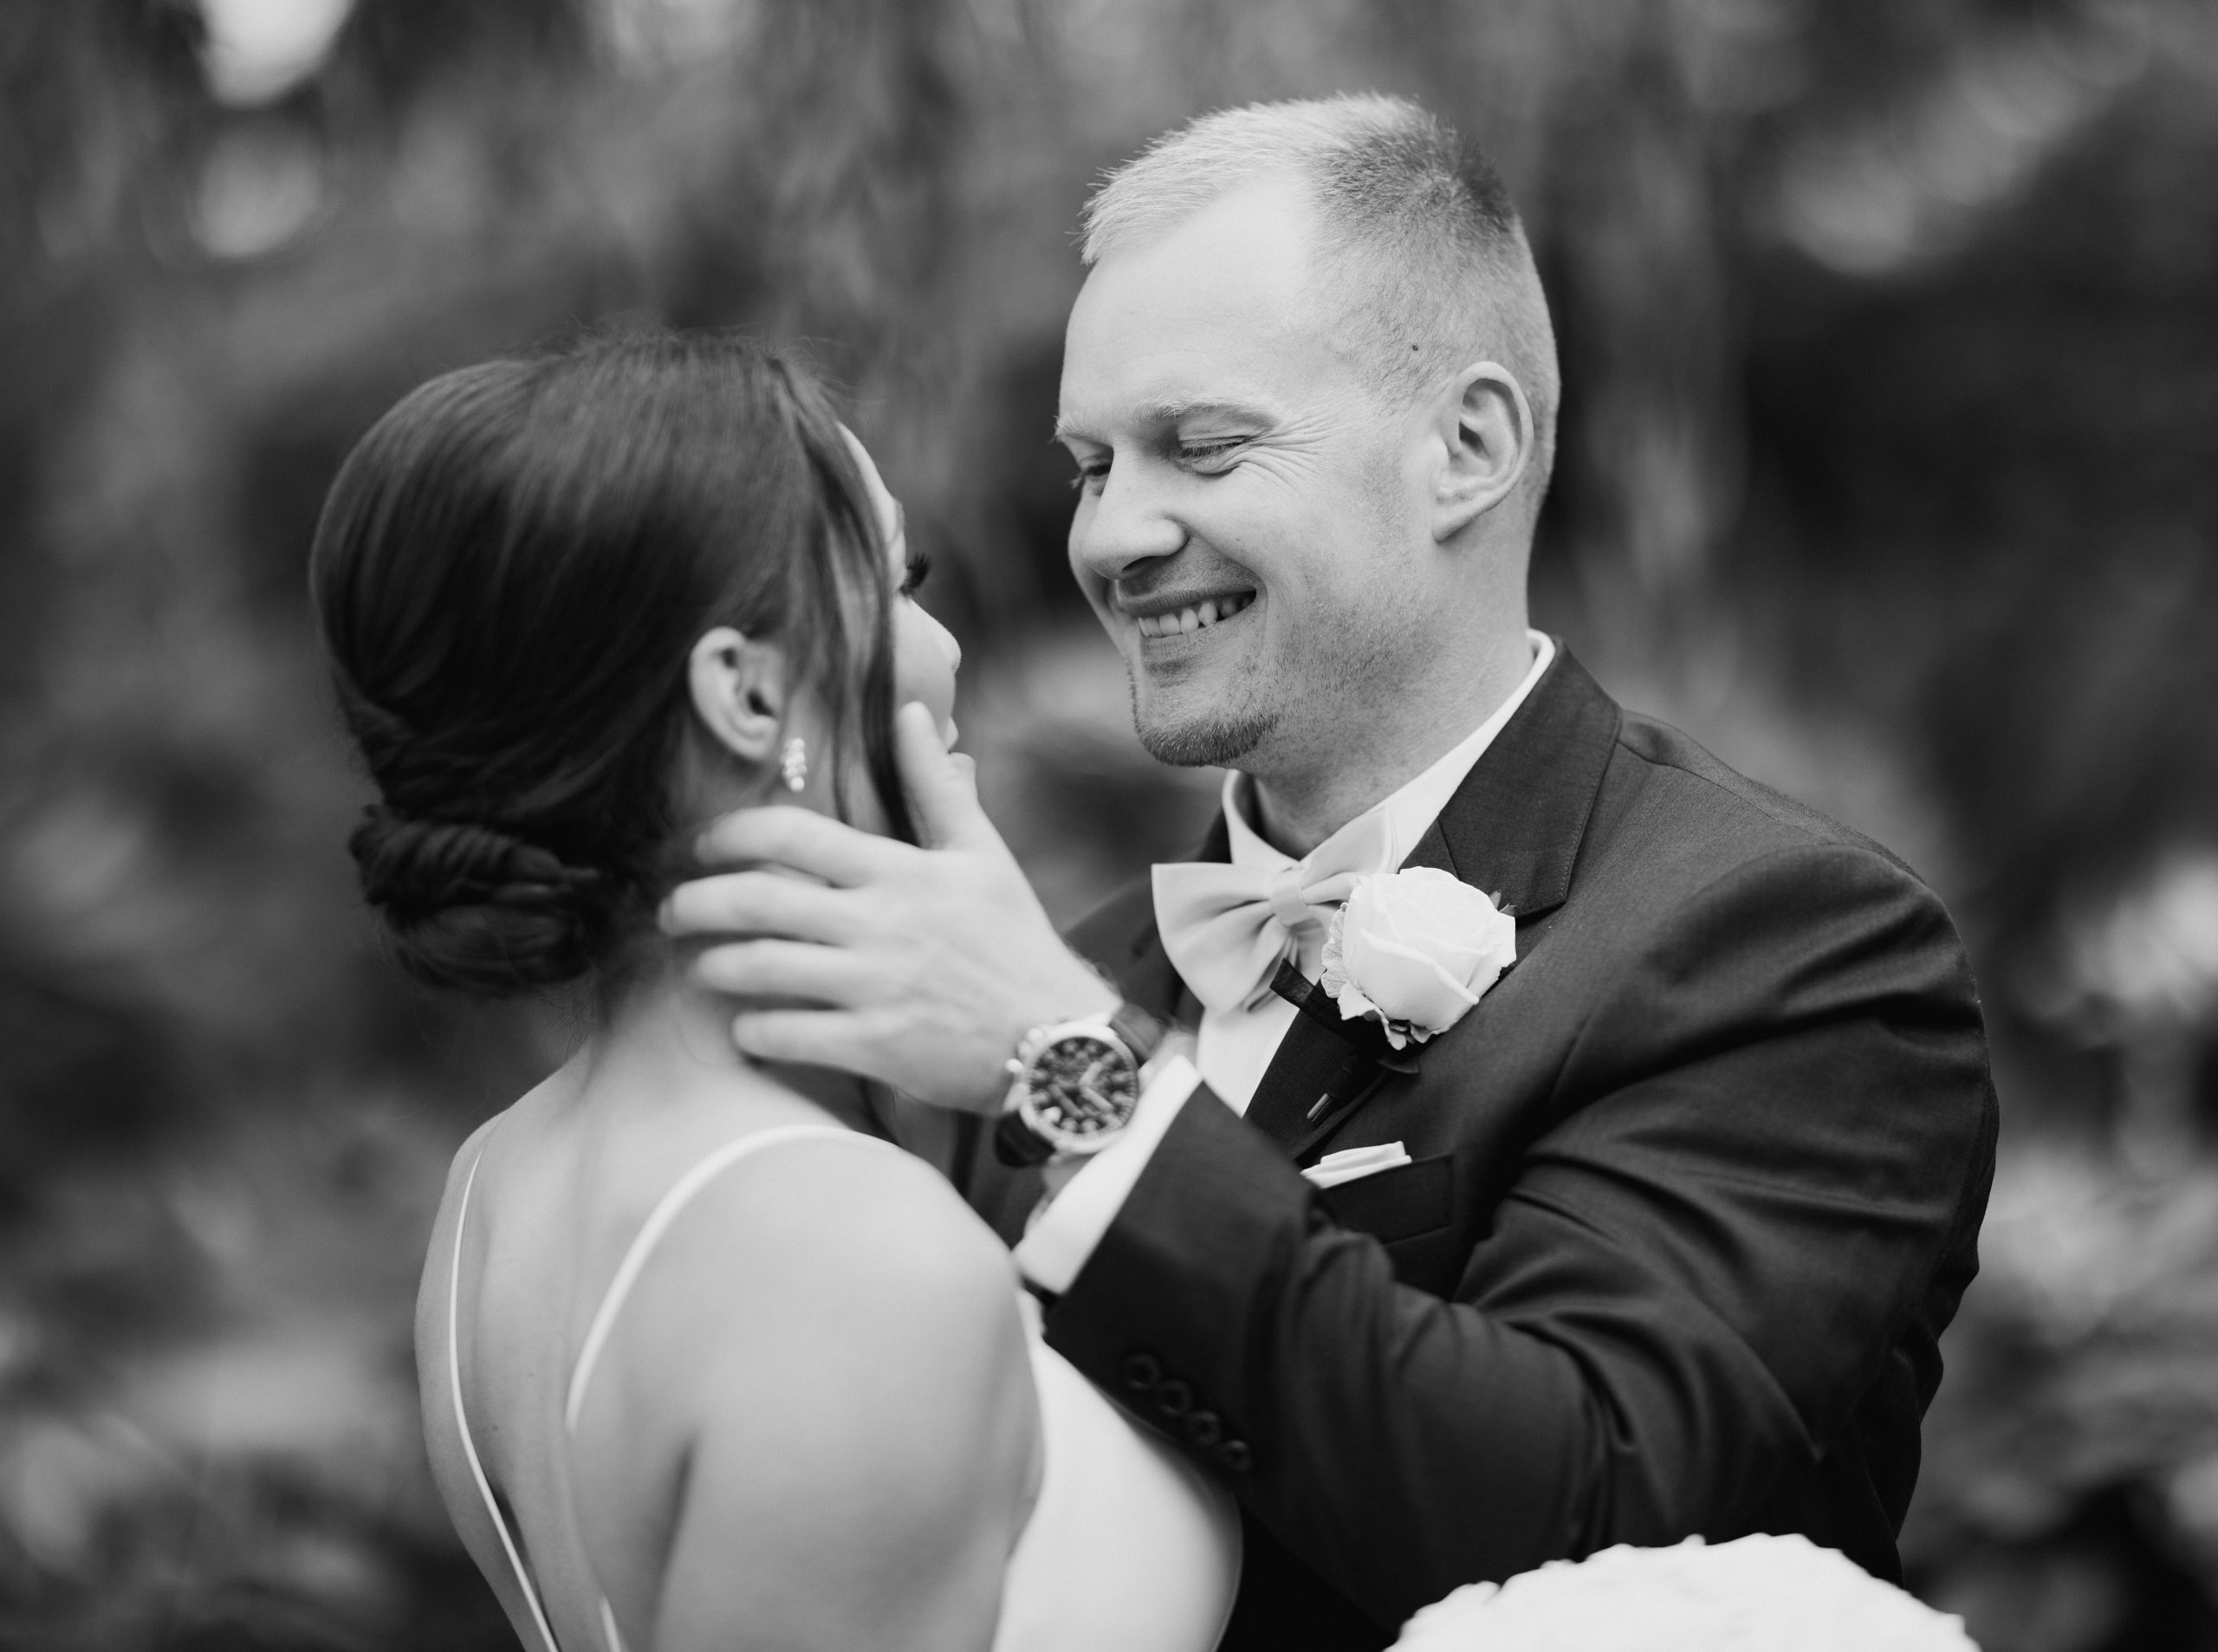 https://breannapluskevin.com/wp-content/uploads/photo-gallery/imported_from_media_libray/kiana-lodge-wedding-bm-breanna-plus-kevin-12.jpg